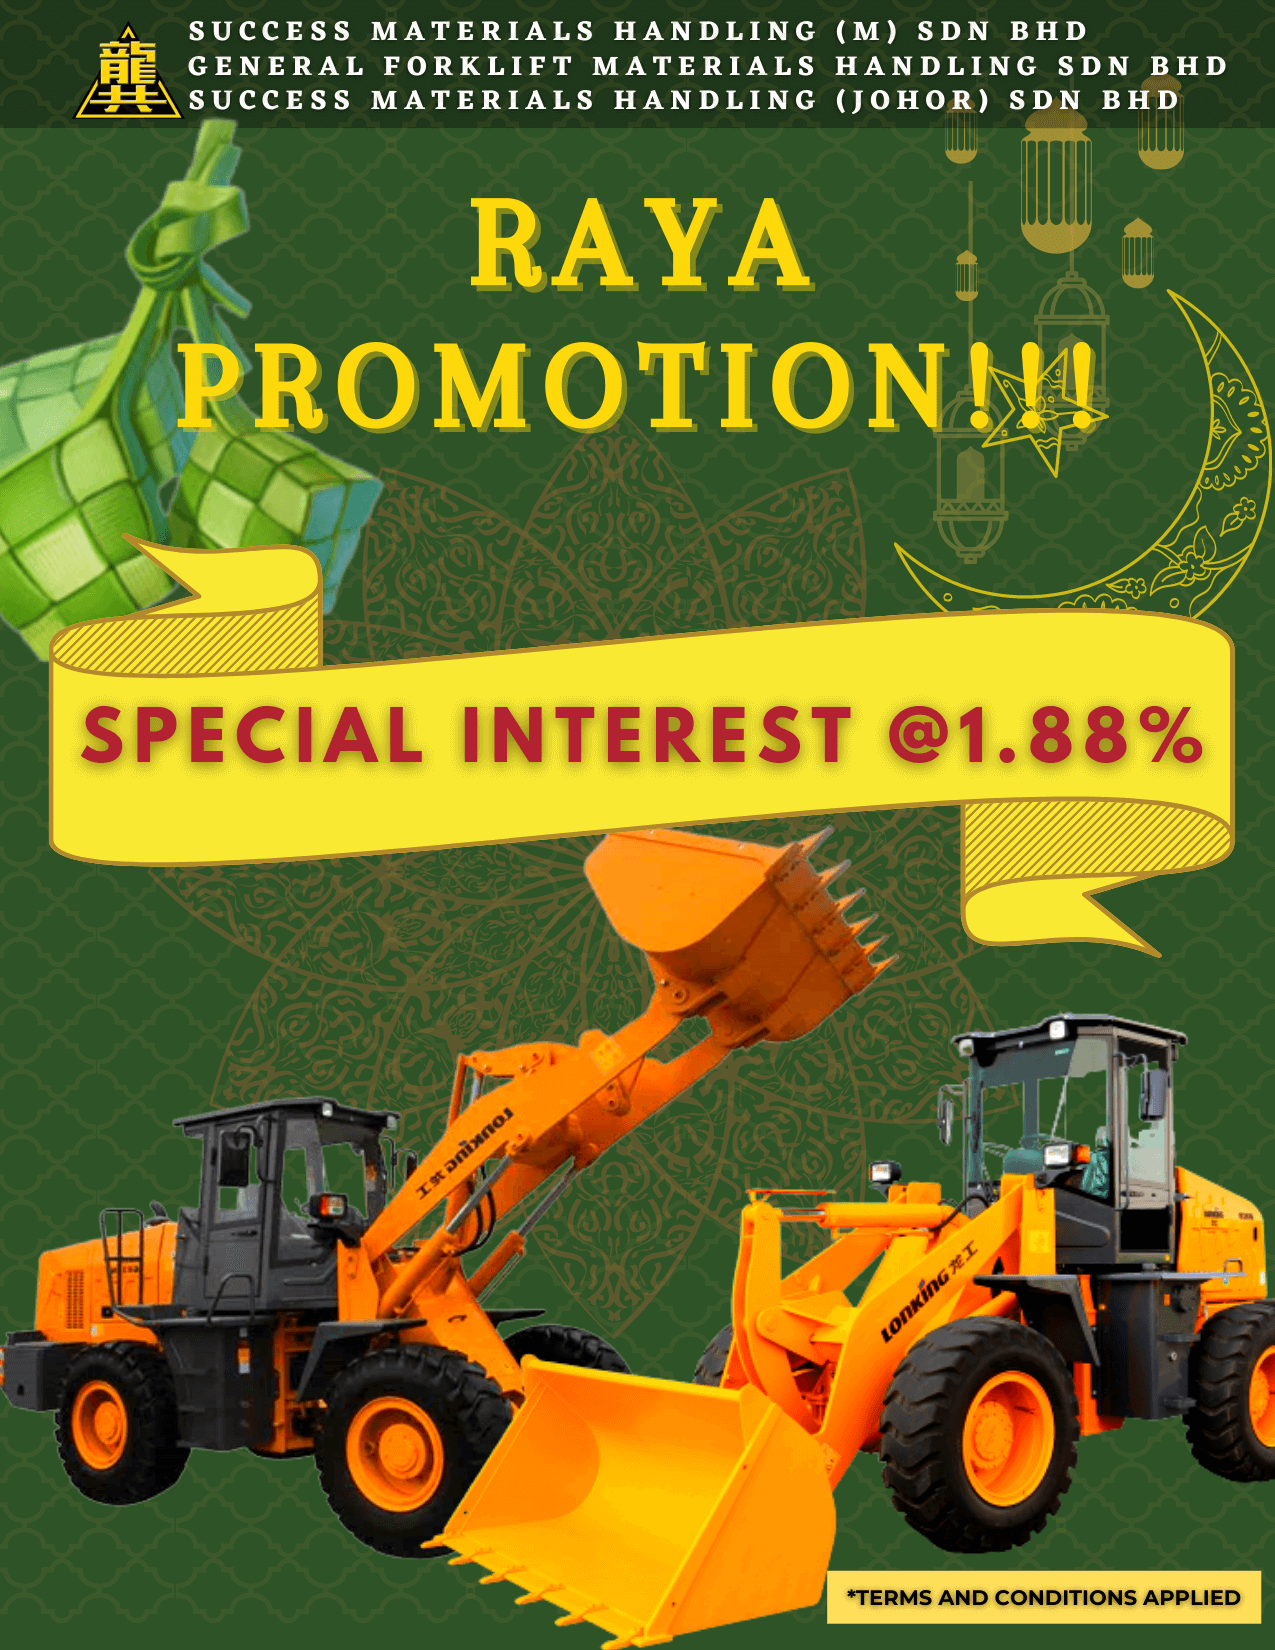 Popup about Success Material Promotion Banner for Raya